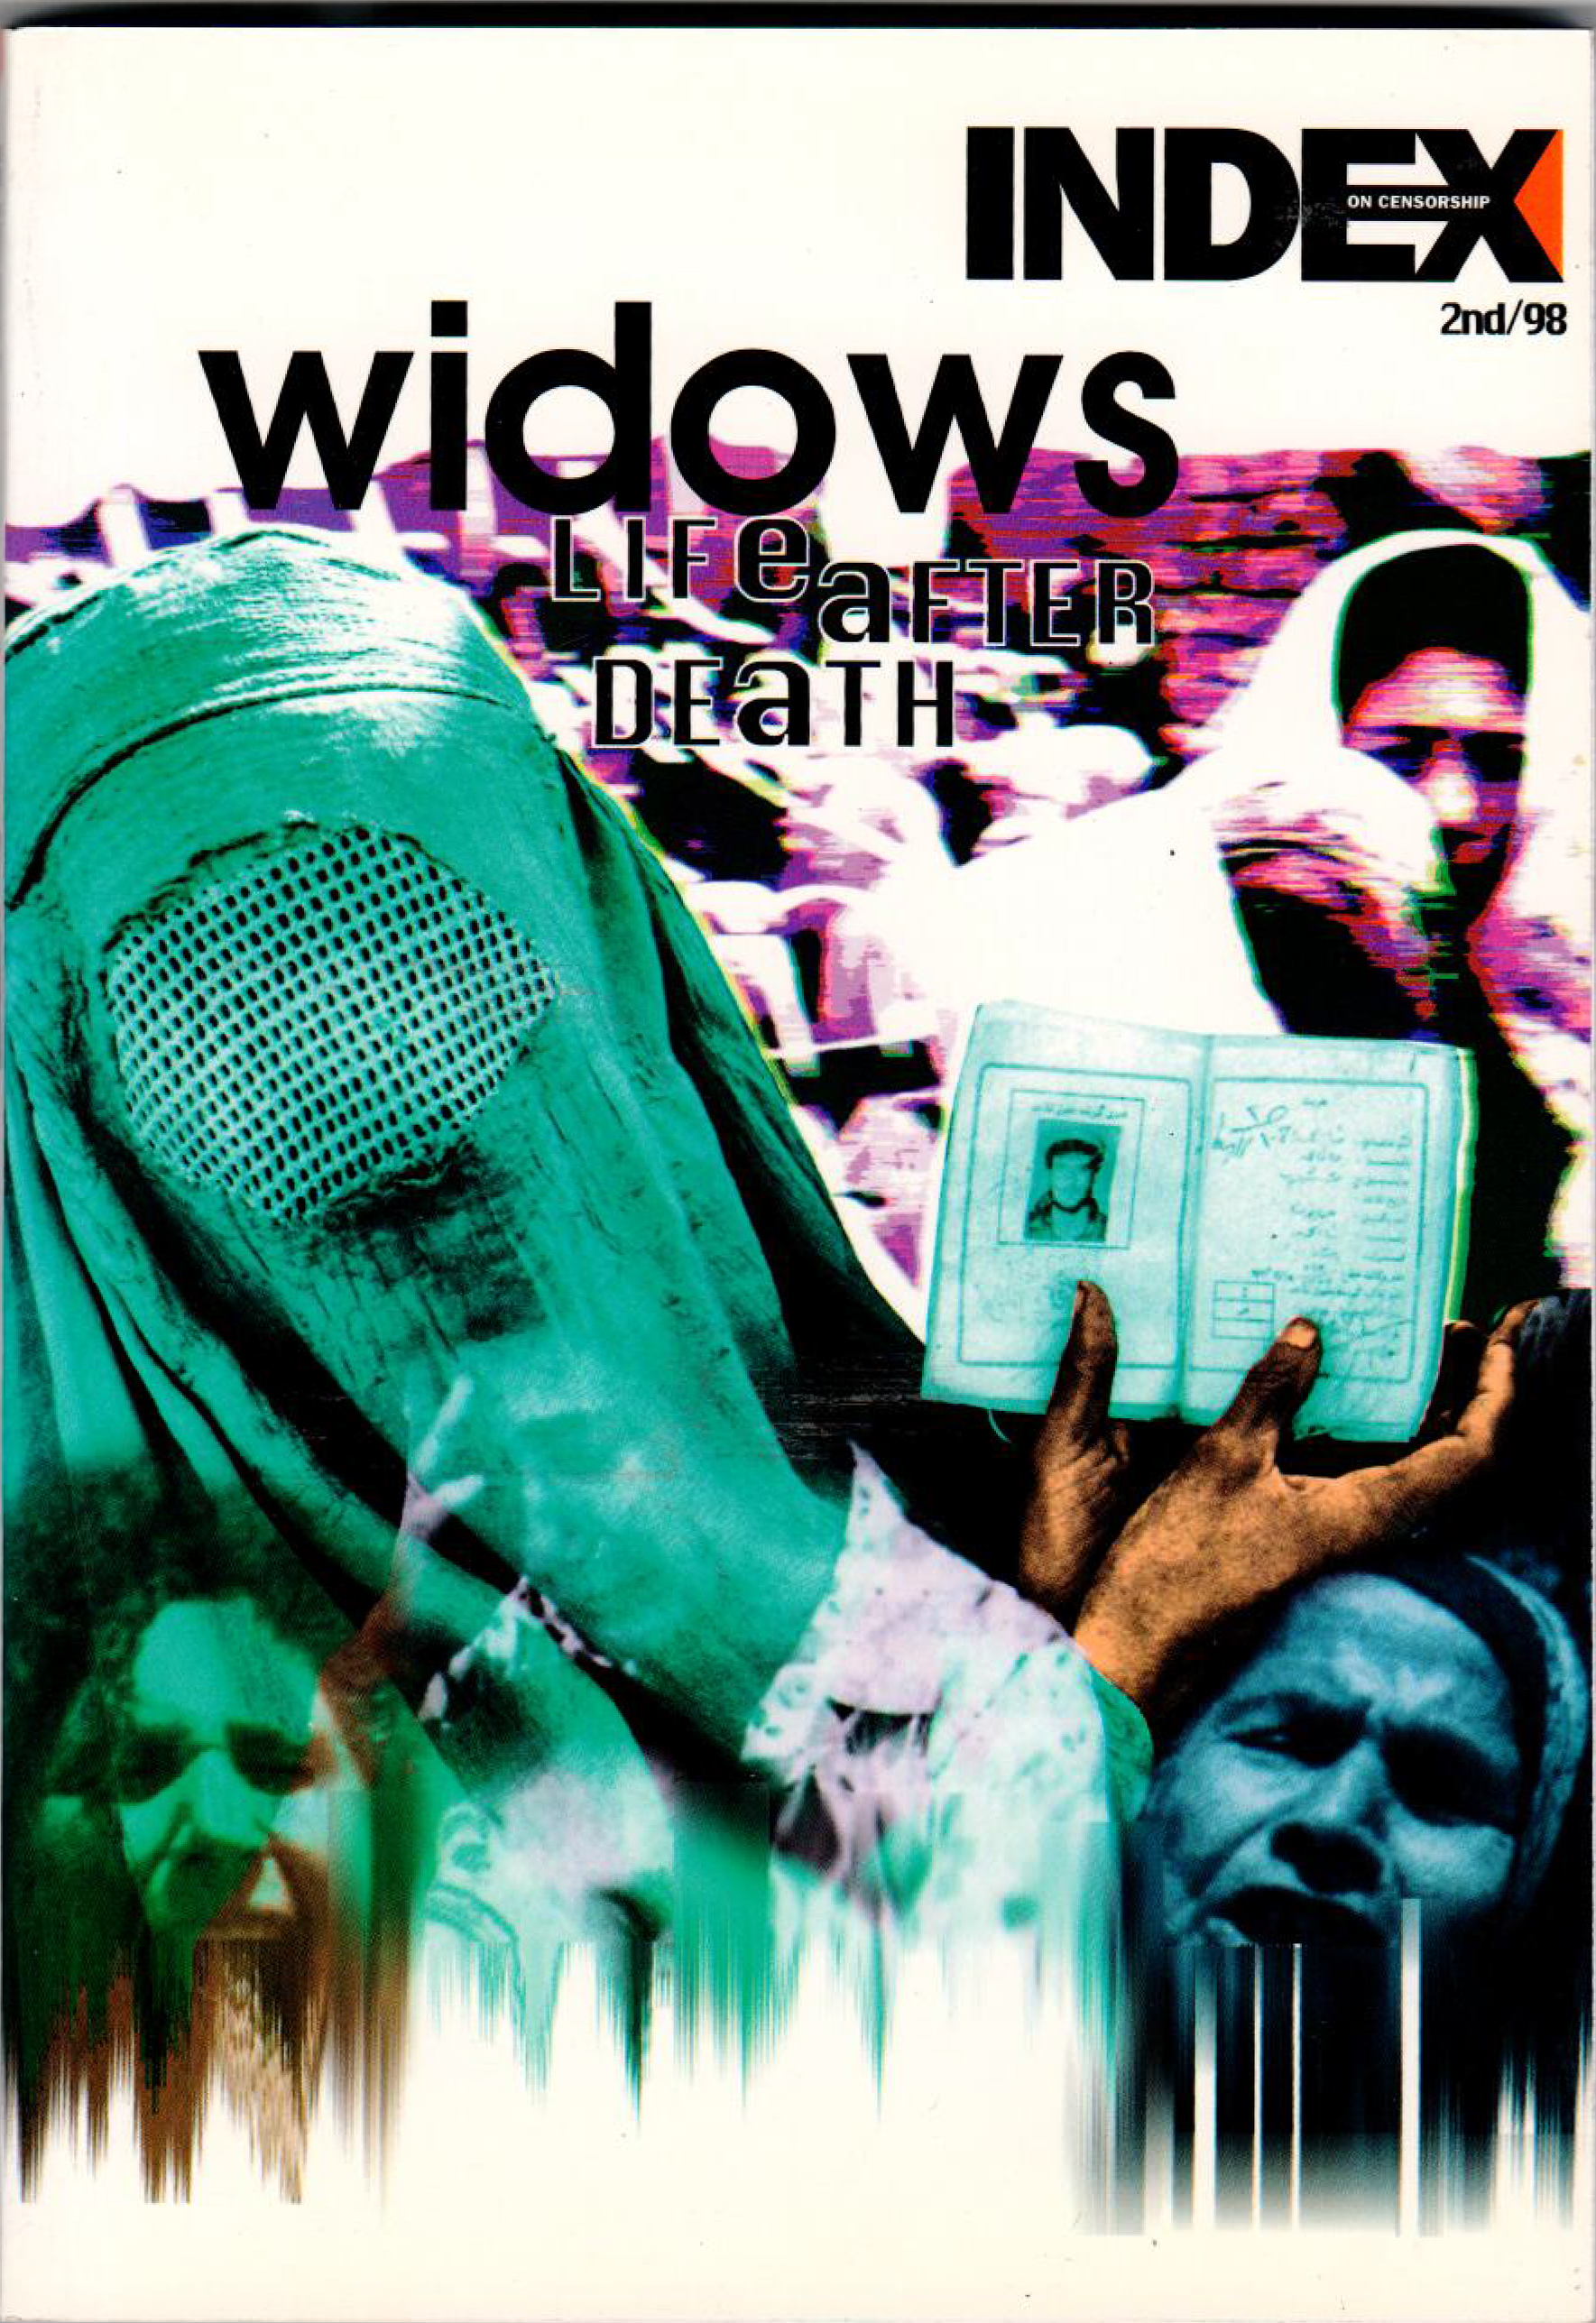 Widows: Life after death, the March 1998 issue of Index on Censorship magazine